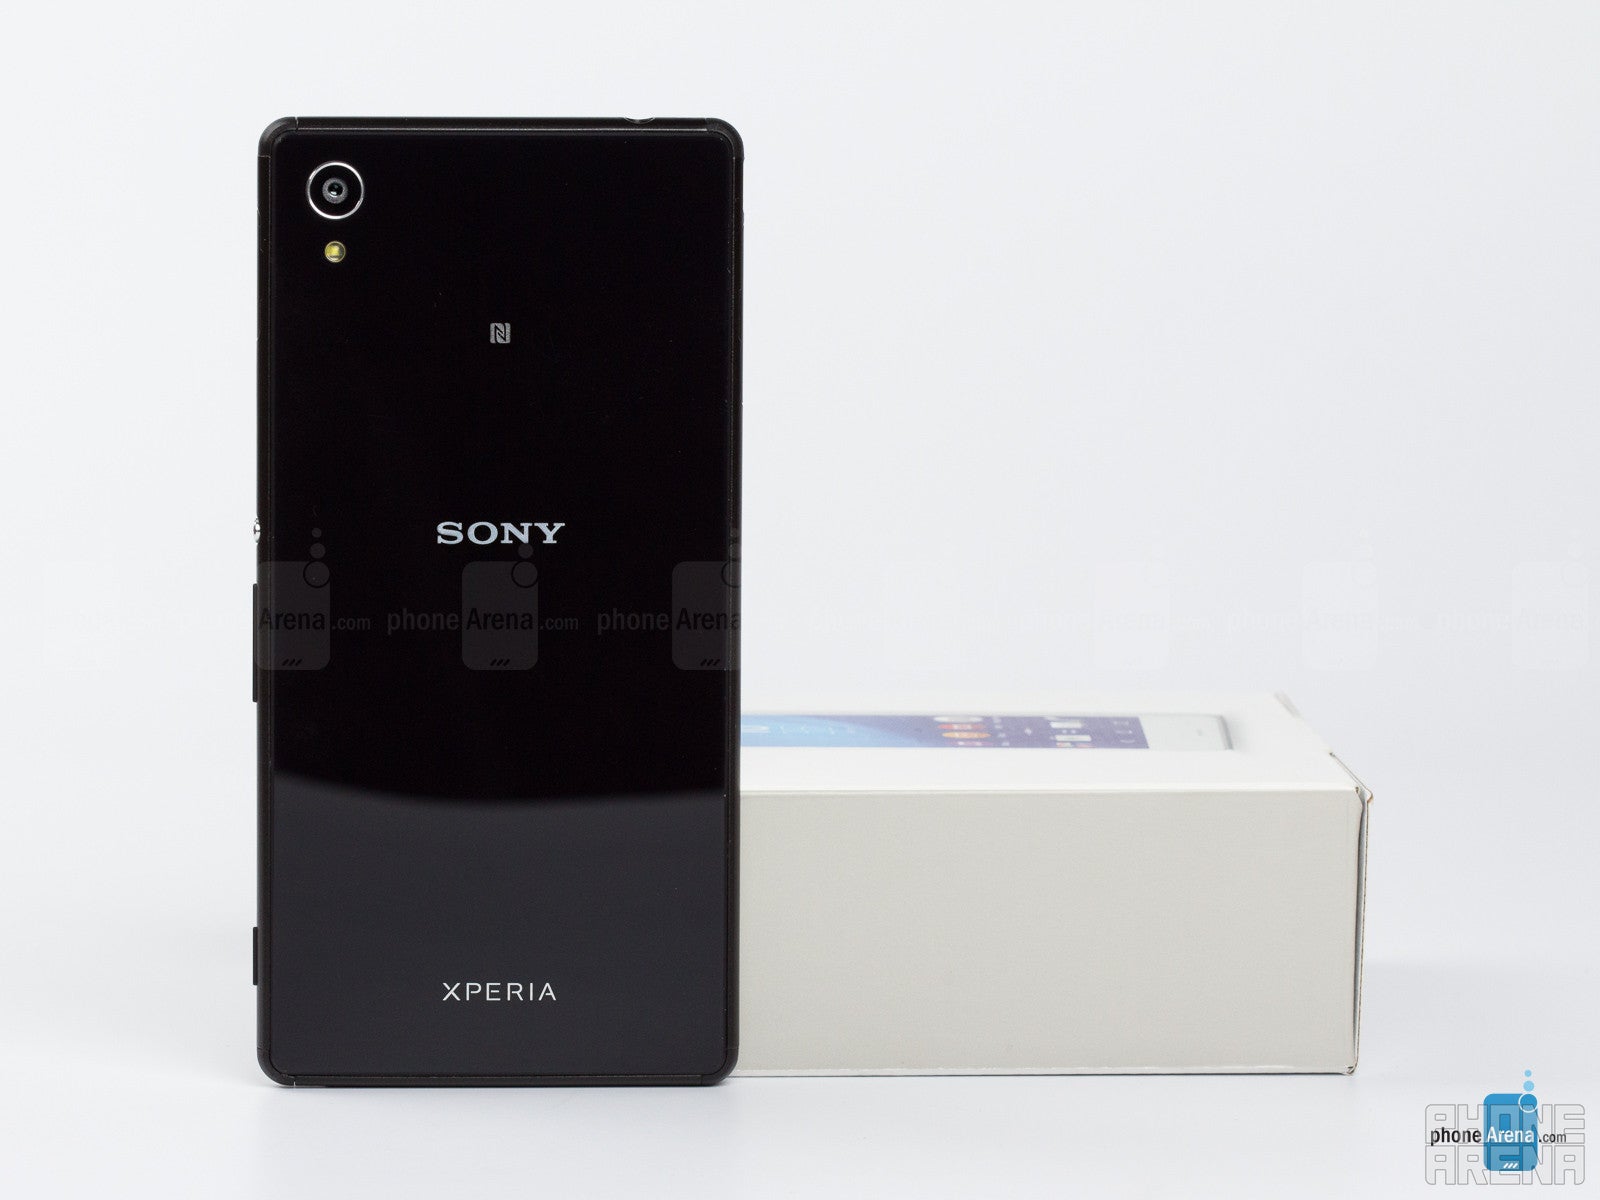 The Sony Xperia M4 Aqua is currently priced at $149 on Amazon, save 25%